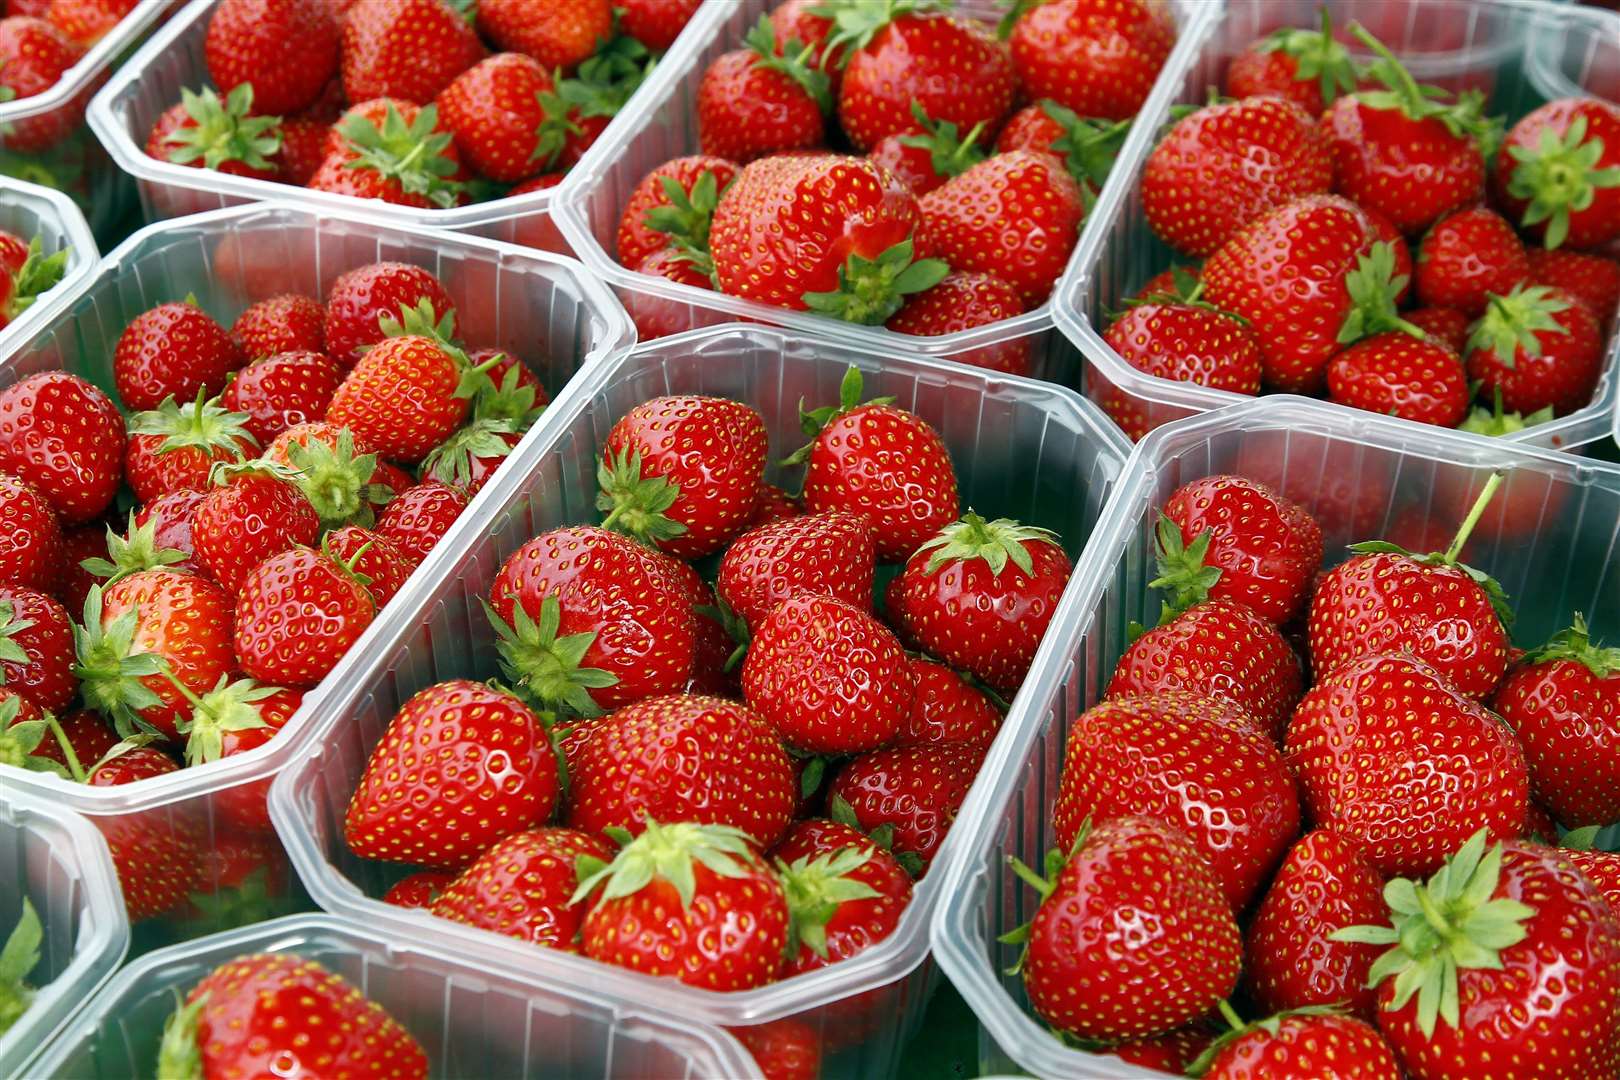 Kent's strawberries will be sold at Wimbledon this year. Picture: Sean Aidan